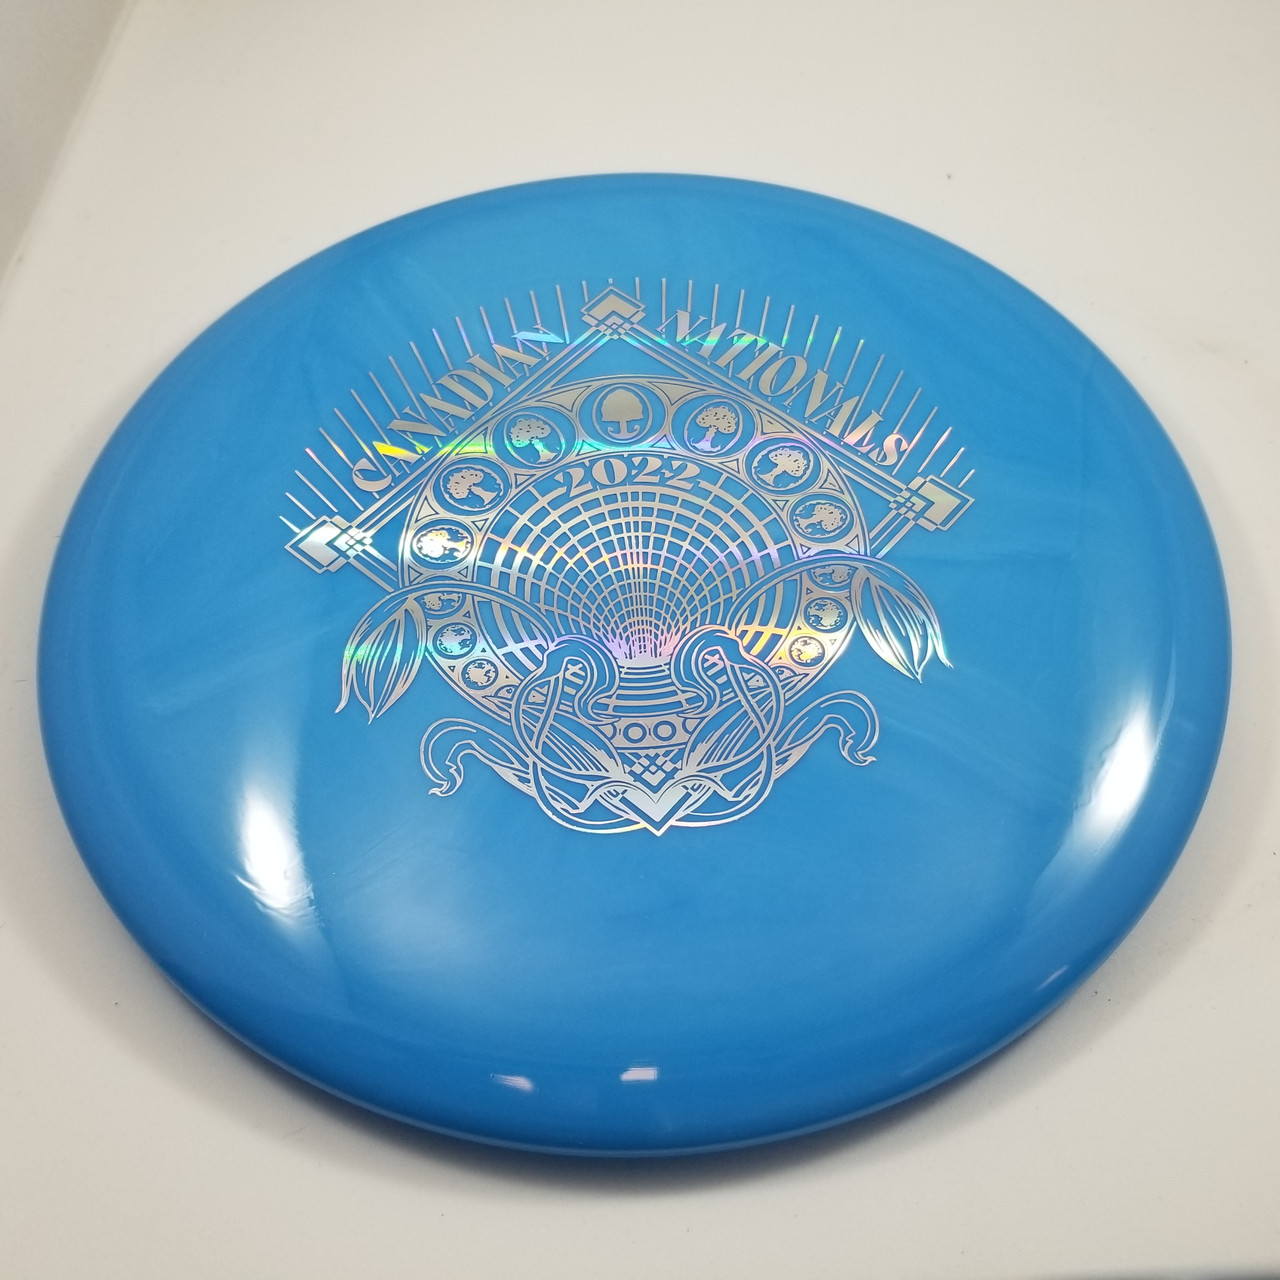 Discmania Method Lux Canadian Nationals 2022 Blue-Silver Holo 180g